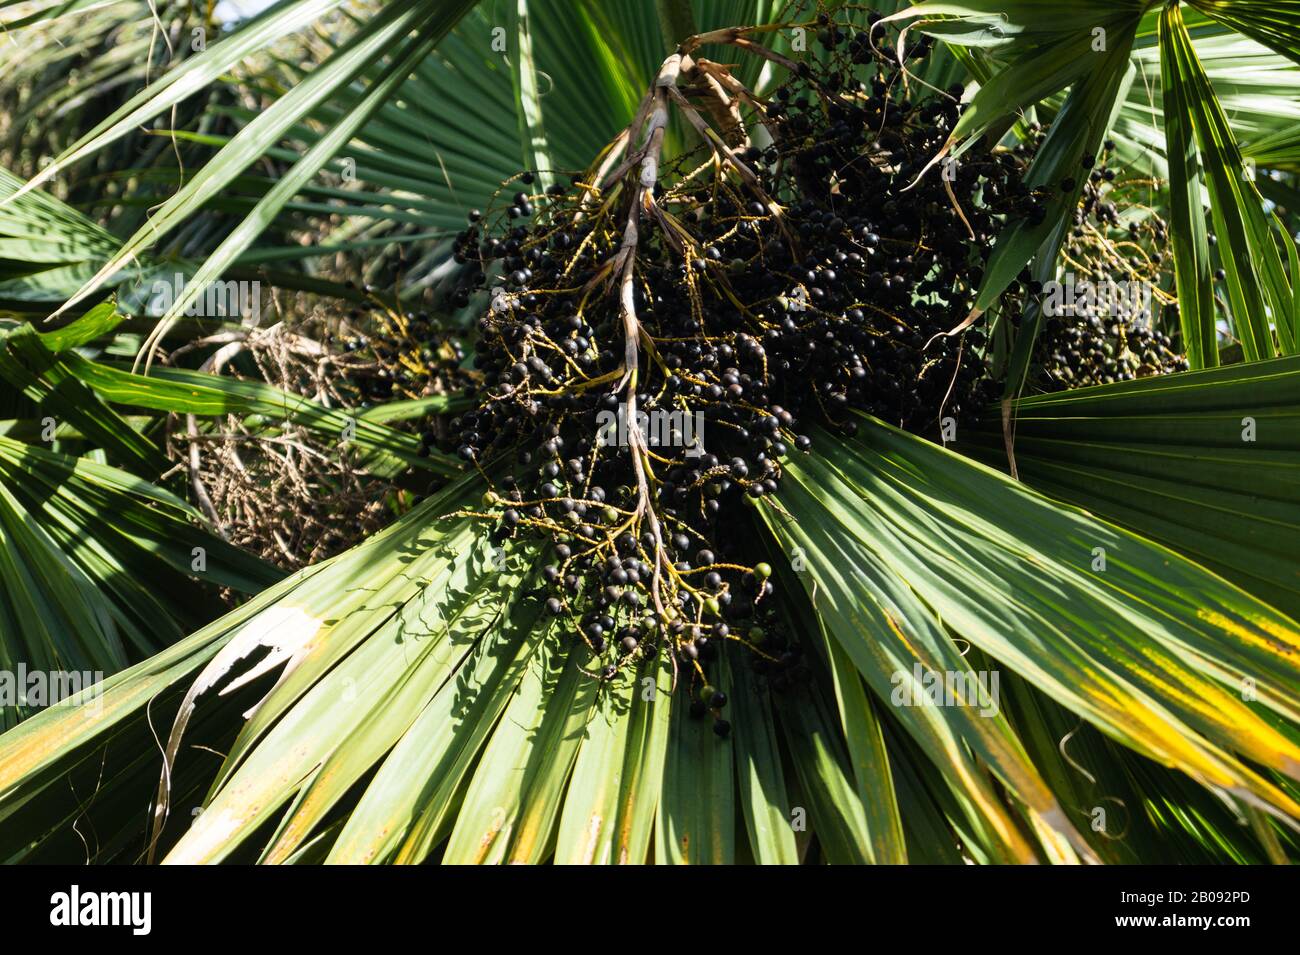 Palm tree in spain with many black fruits Stock Photo